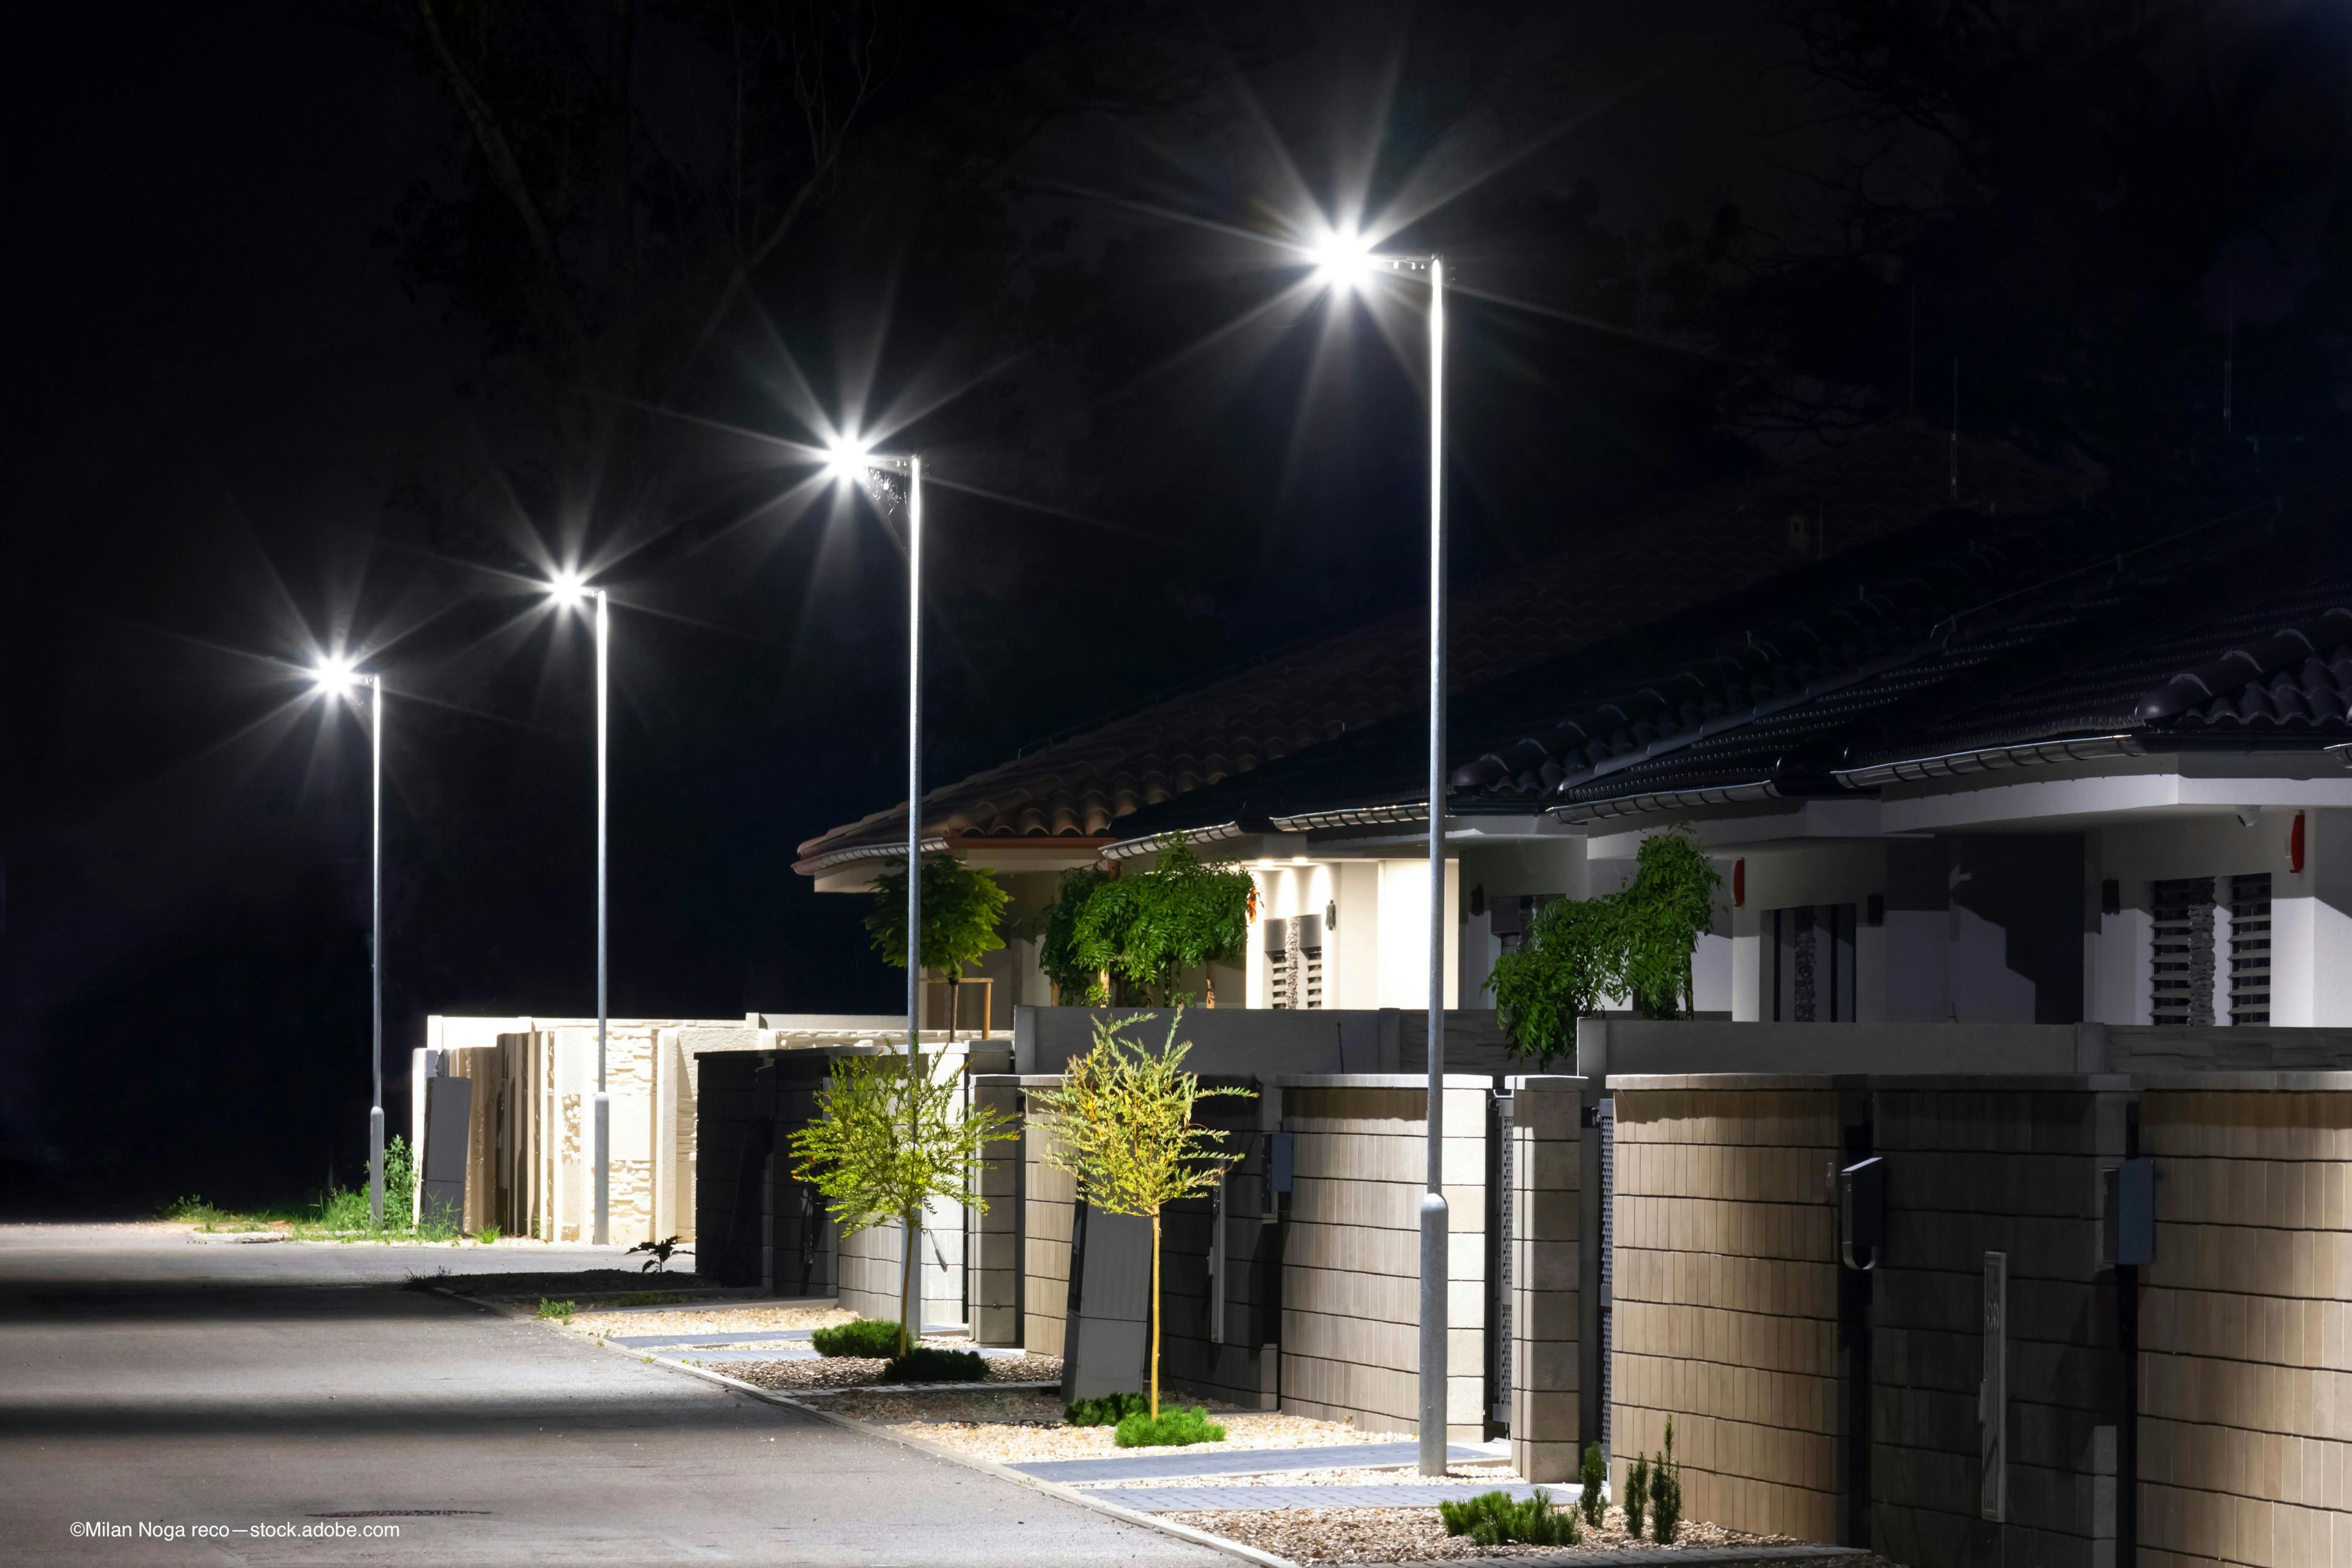 street lamps outside of homes and other nighttime artificial light may affect AMD progression - Image credit: Milan Noga reco - stock.adobe.com